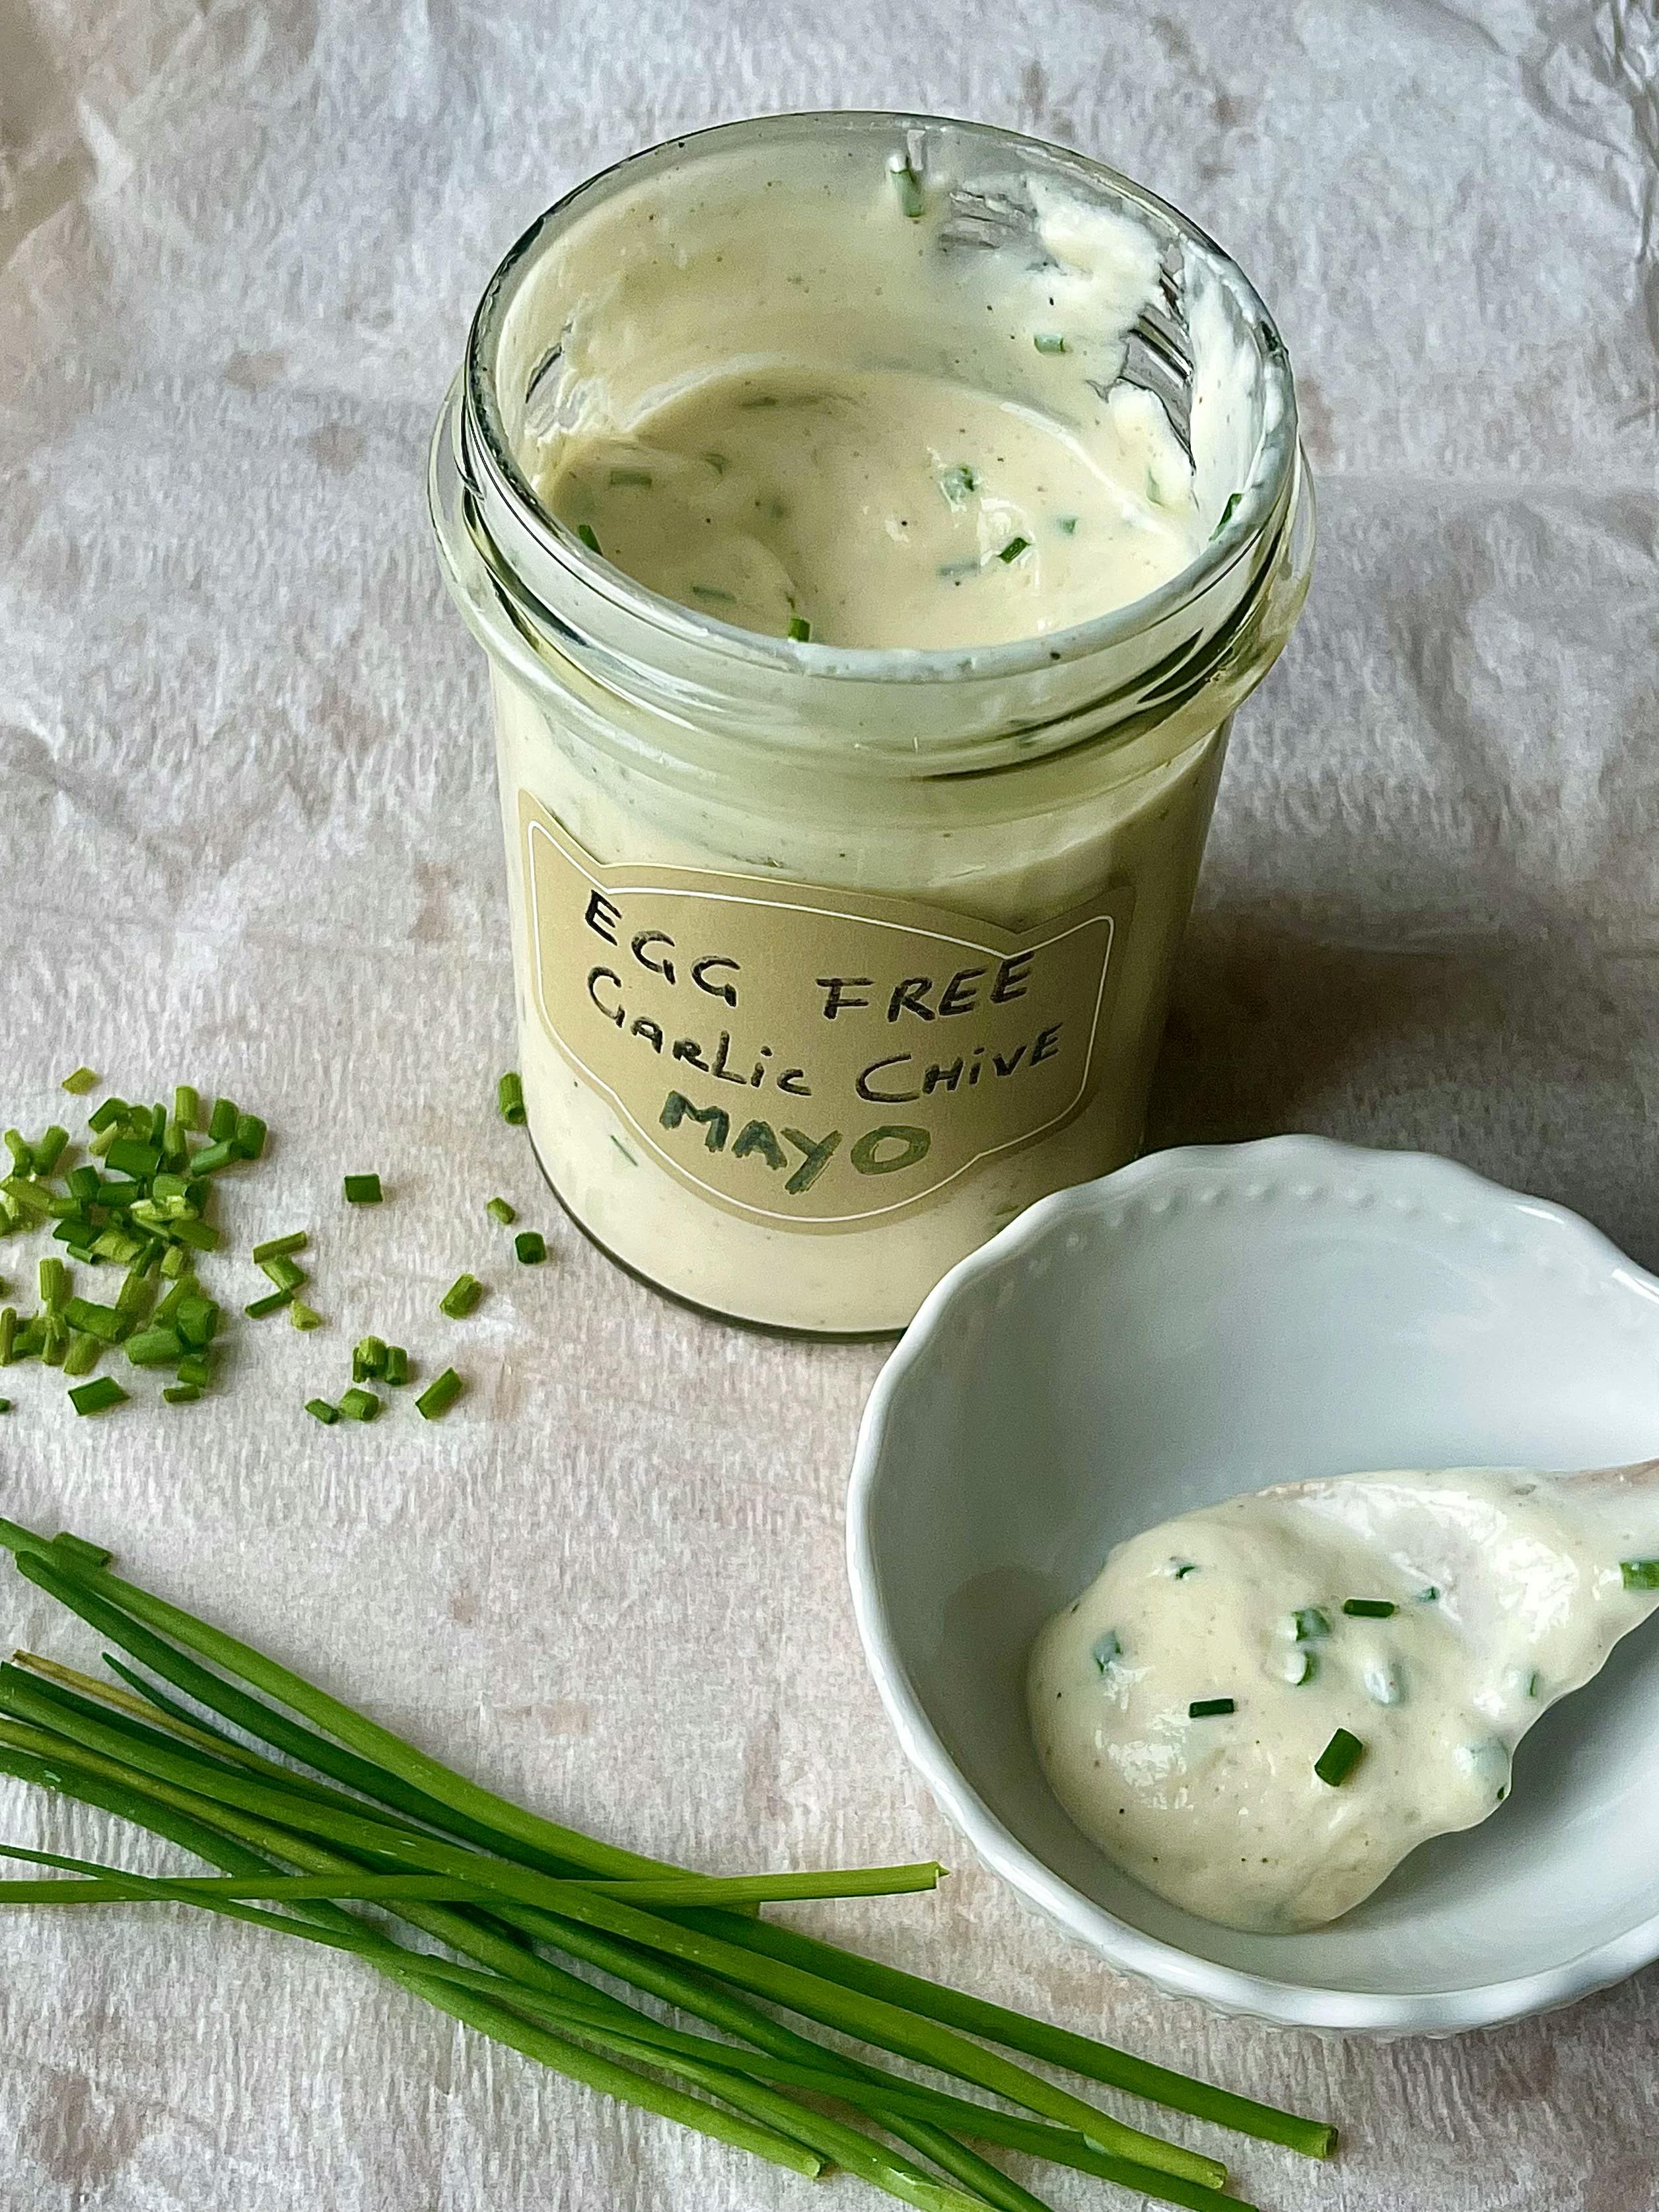 Picture of Egg free Garlic Chive Mayo 